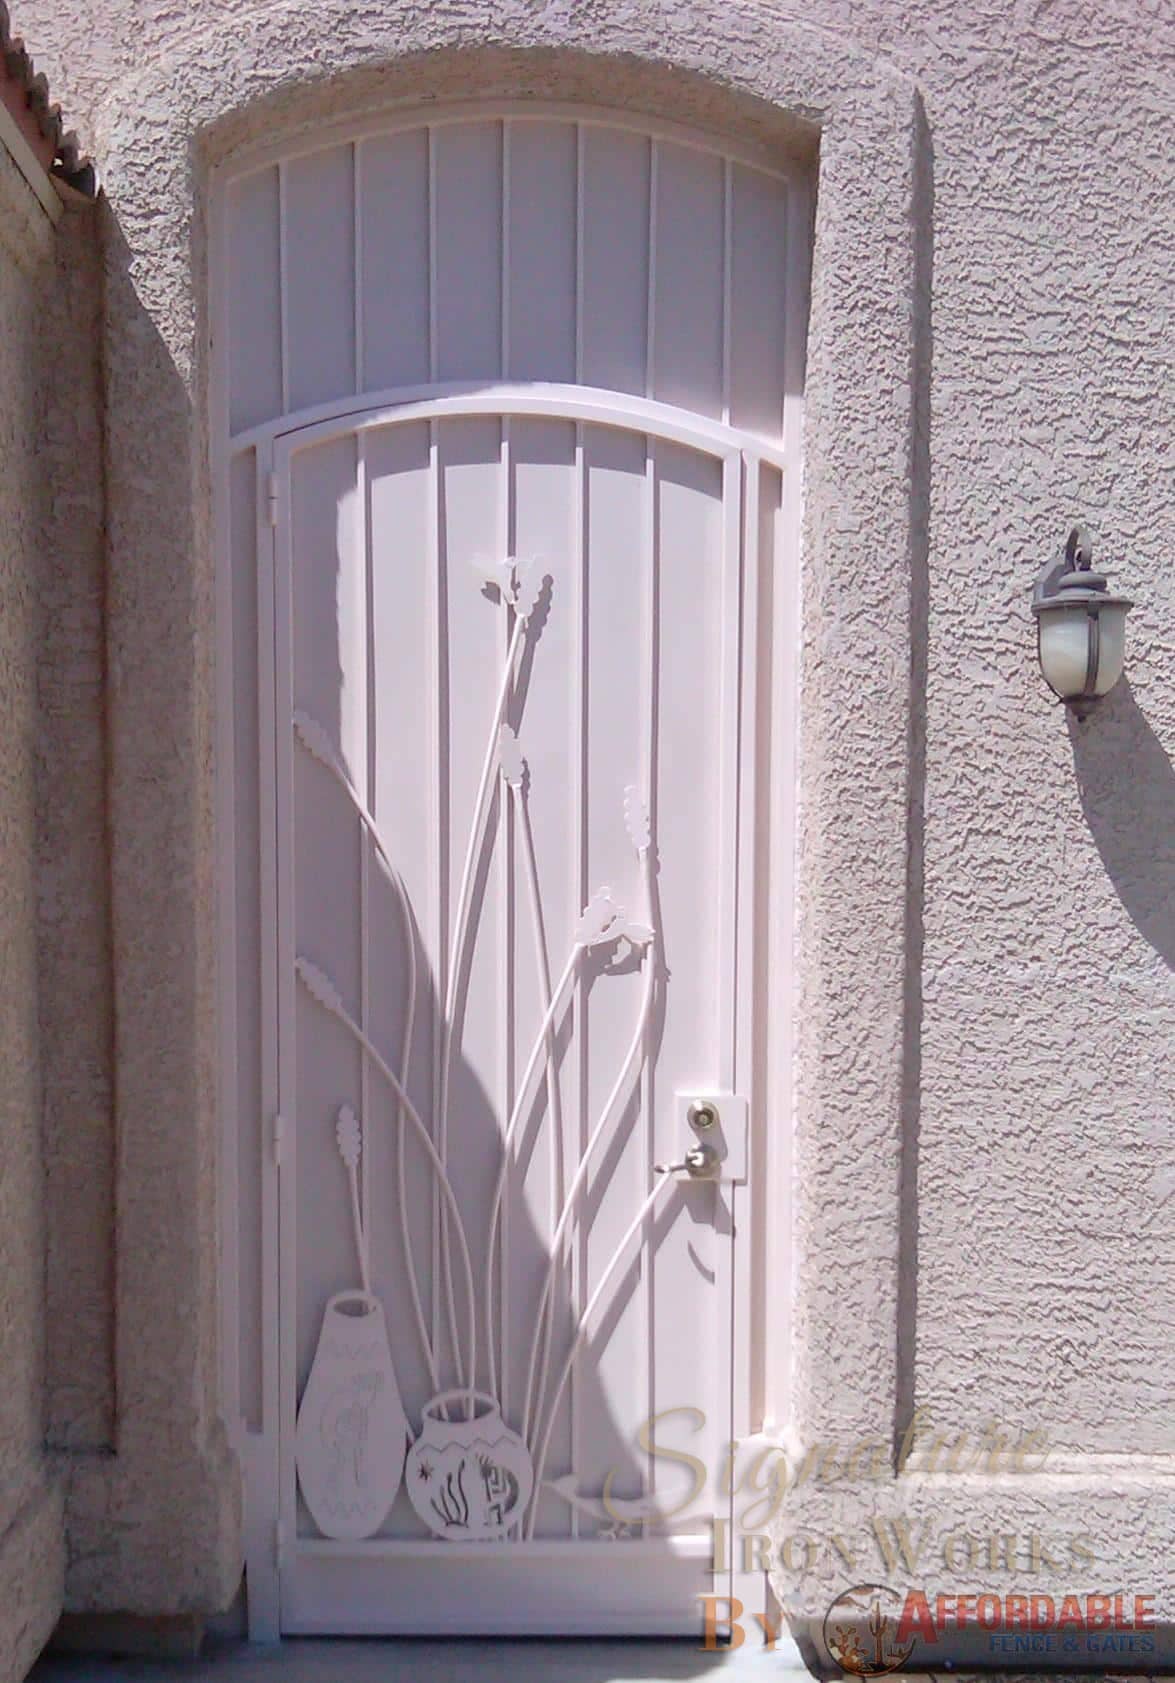 Security door with ocotillo and hummingbird cutouts - Painted white 6016 E - Installed in Tucson